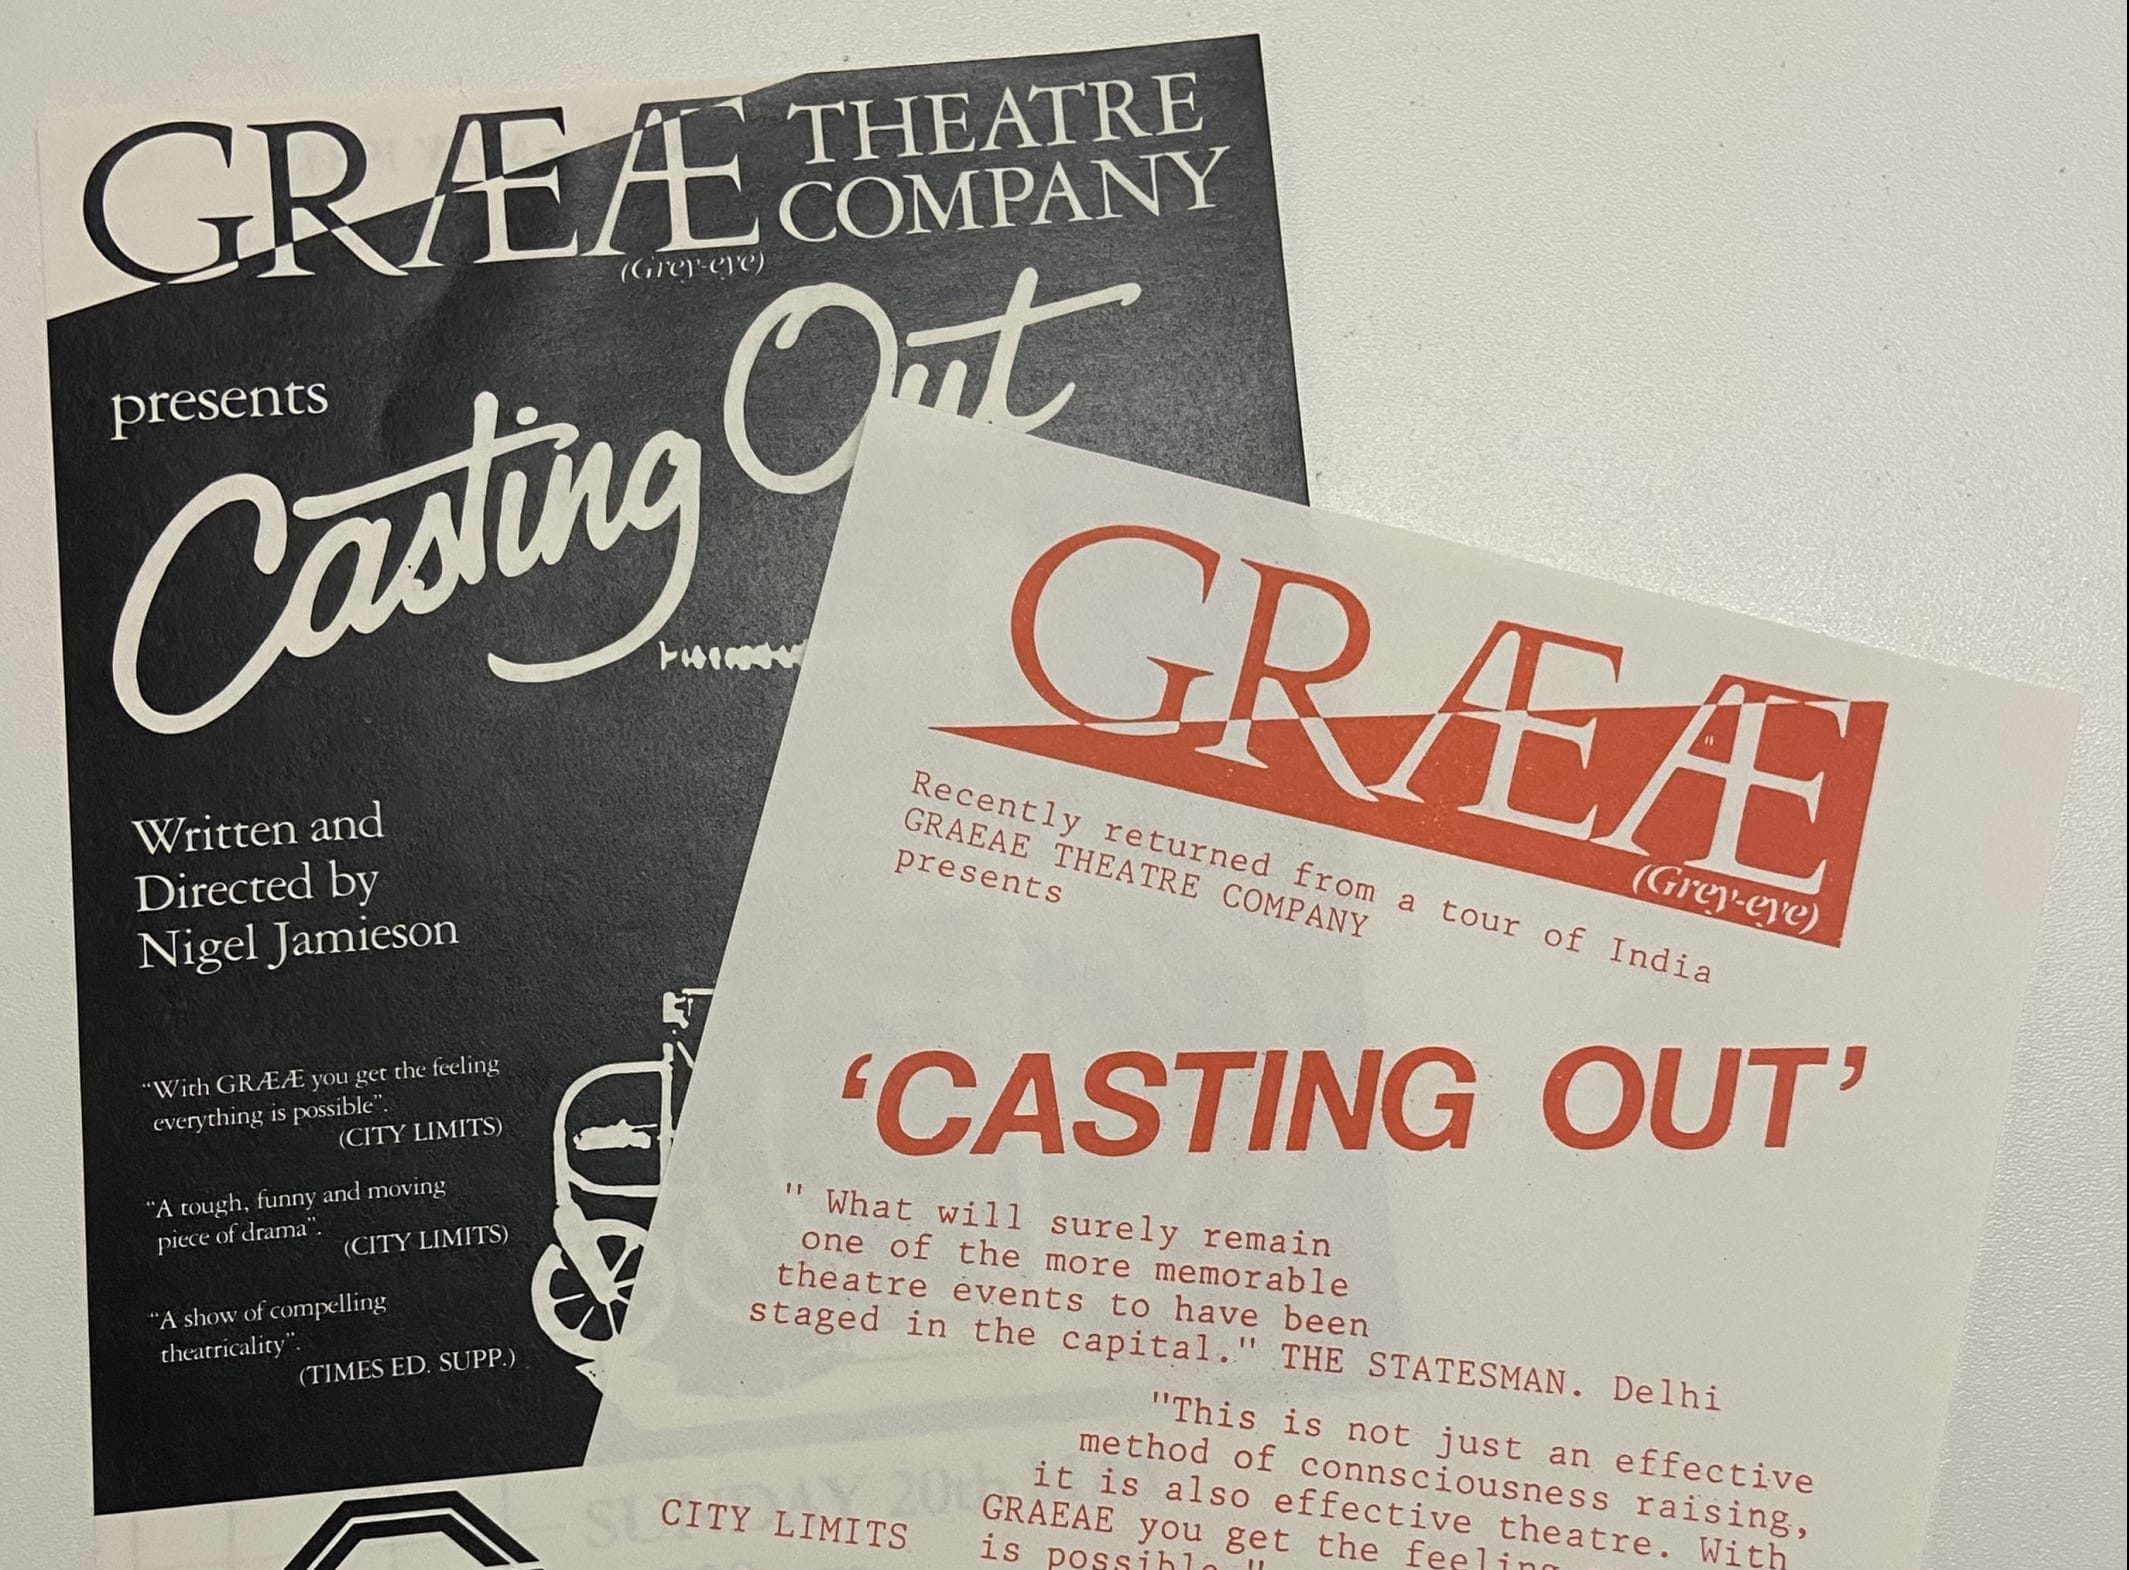 Two flyers for the production are placed on top of each other. They both read the title of the production with the Graeae logo at the top. There are tour dates and review quotes listed.